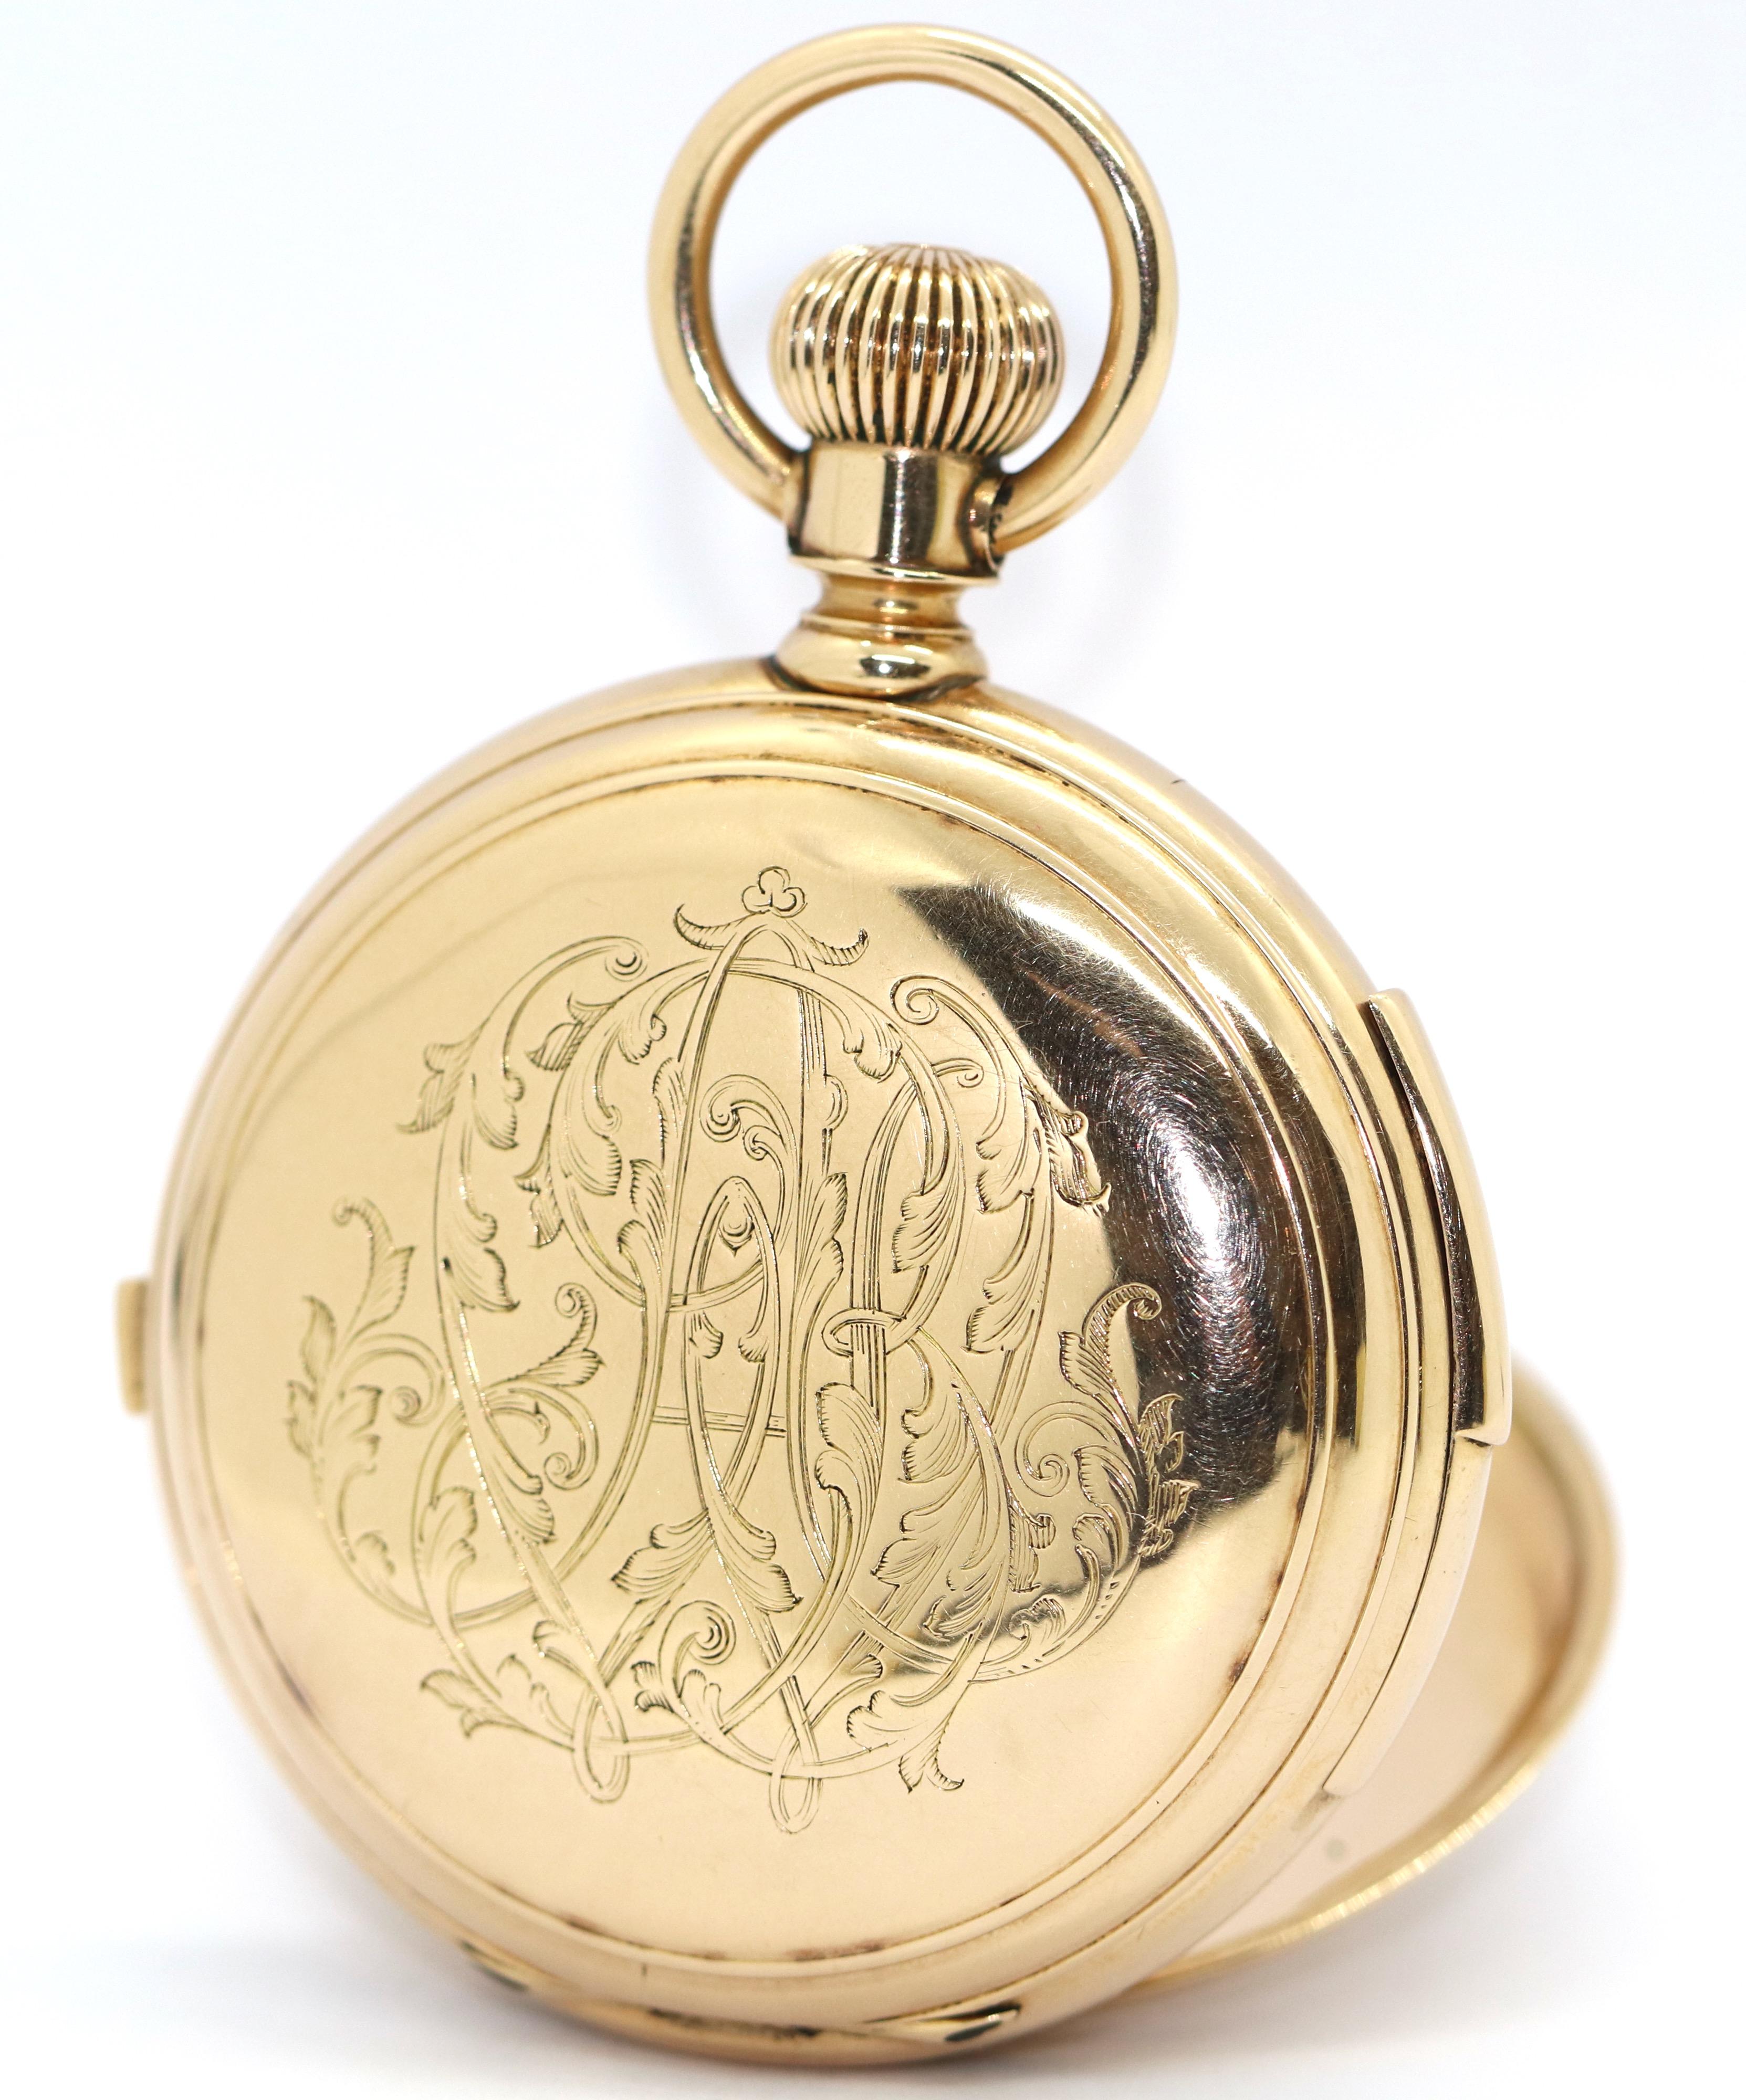 14K Gold Pocket Hunter Watch by American Watch Co. Waltham, Chronograph Repeater For Sale 3